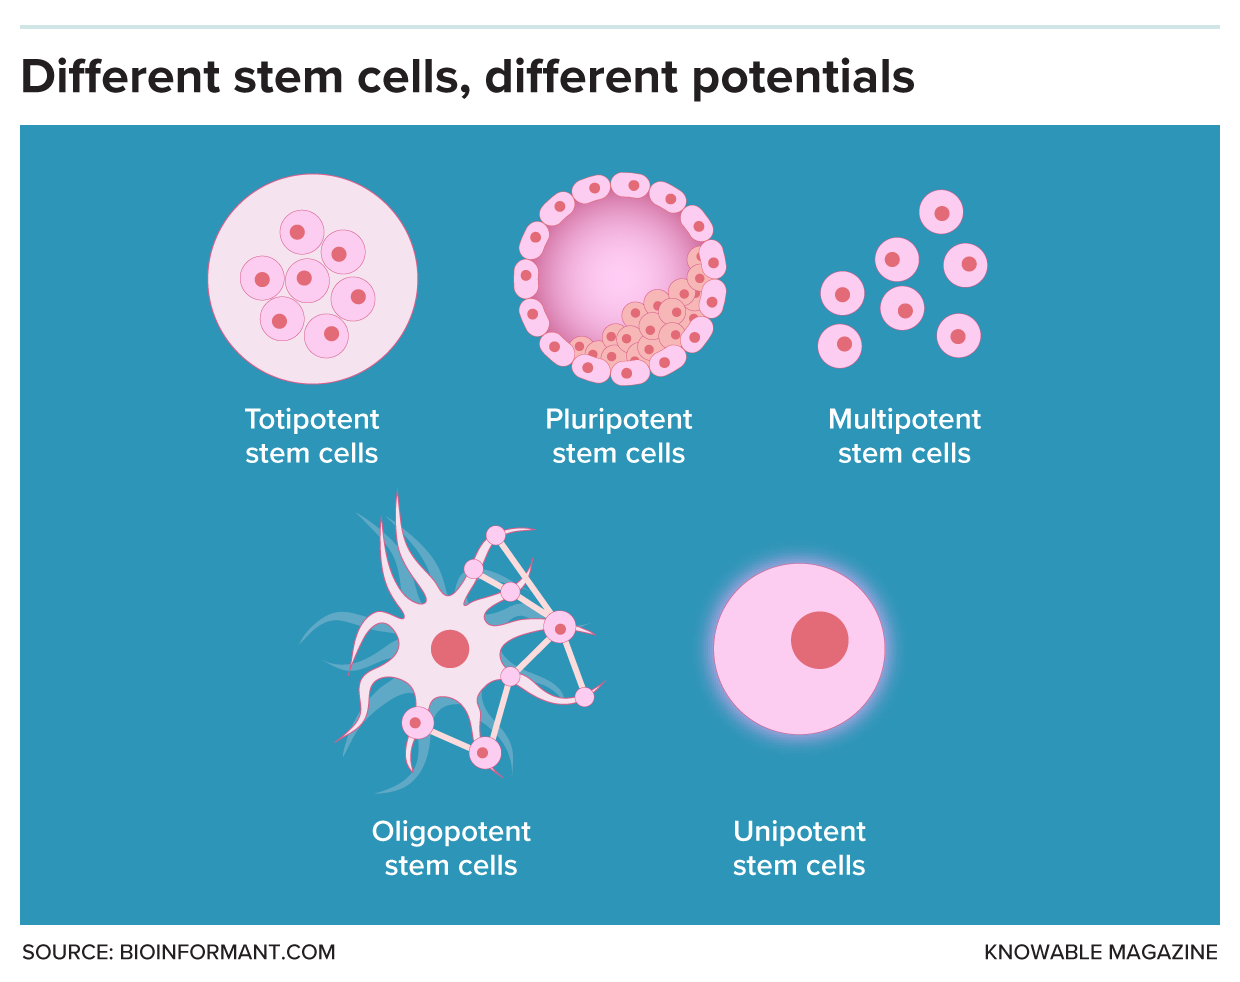 Stem cells differ in abilities. Totipotent stem cells are the most powerful: They can form any cell, and even an entire organism. Pluripotent stem cells are almost as versatile, while multipotent stem cells—which include the mesenchymal stem cells in menstrual blood—can make a limited range of cell types. Oligopotent stem cells can make just a few cell types within the same organ or tissue. Unipotent stem cells replace one specific cell type, like sperm or skin cells. Credit: Knowable Magazine